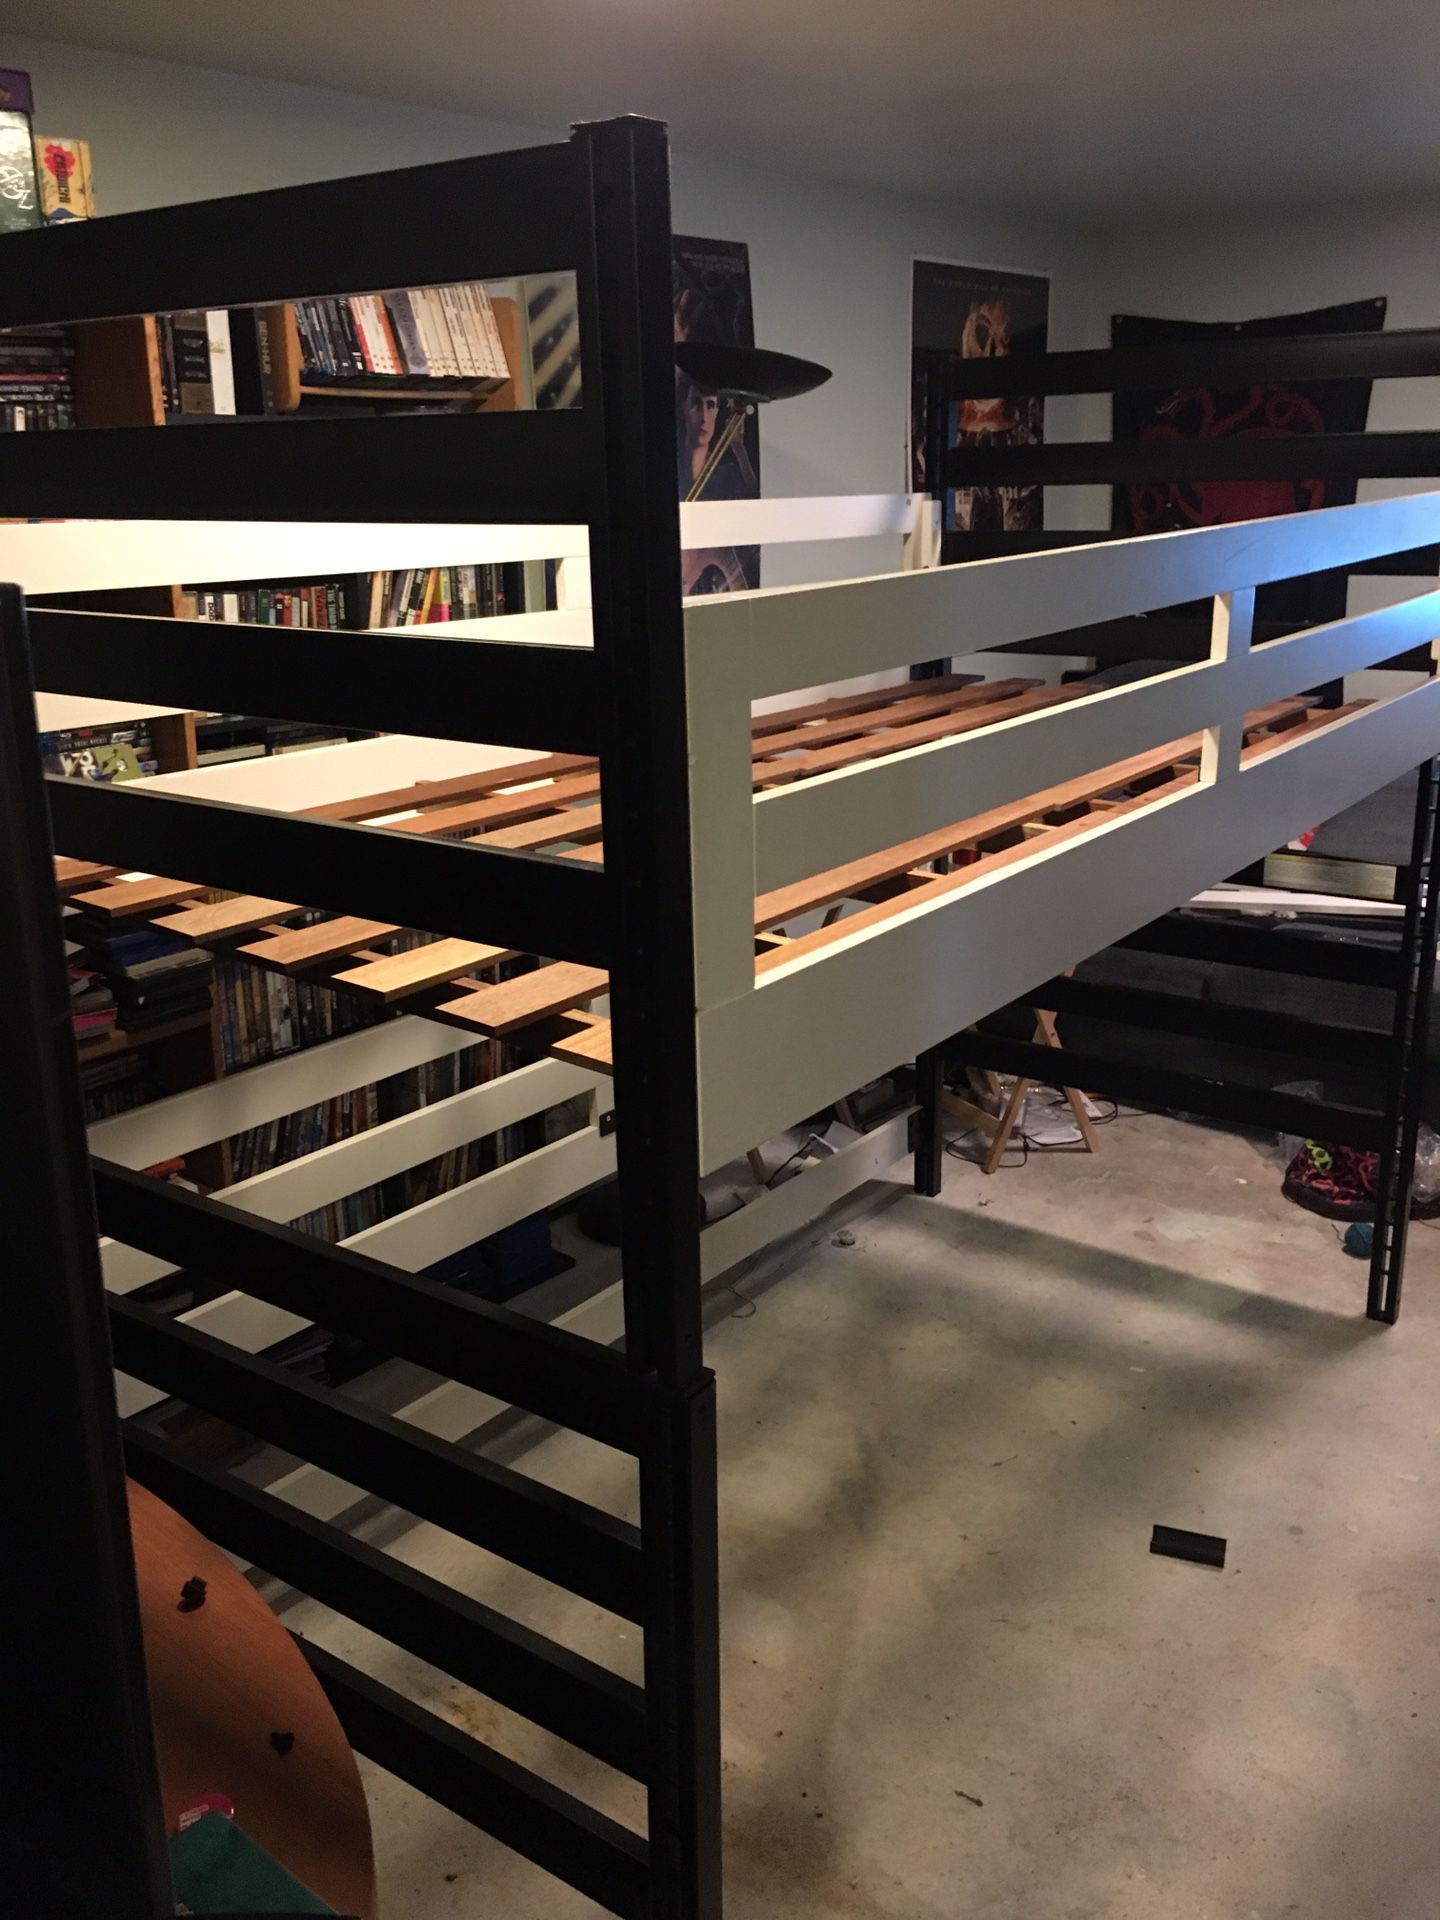 University Loft twin bed and desk "bunk bed"